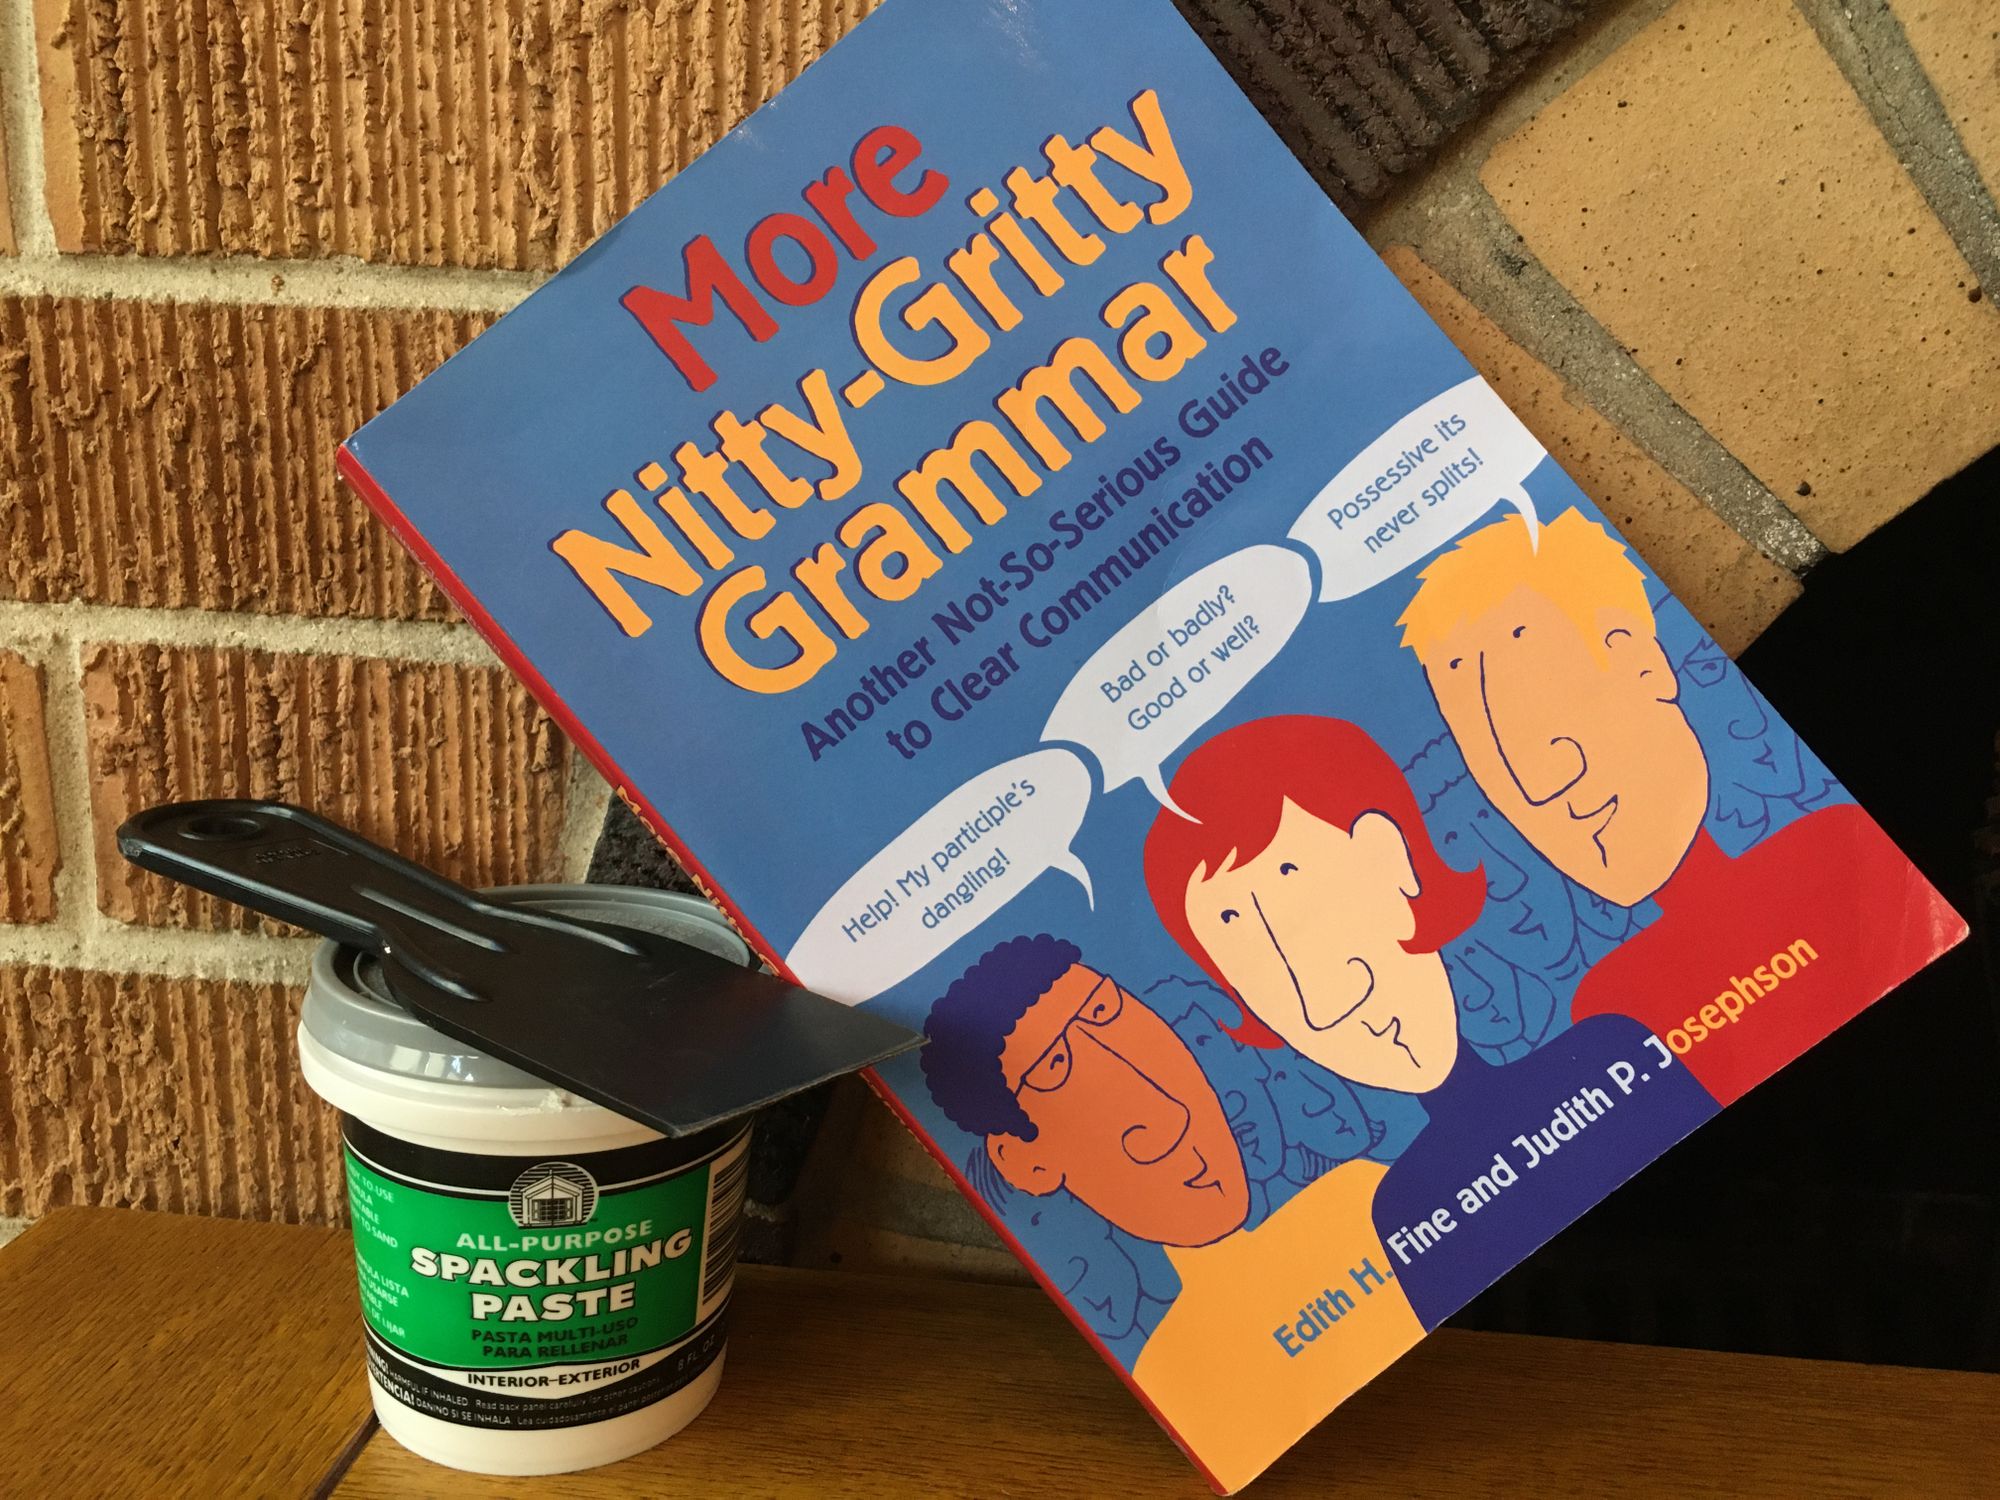 A paperback book titled Nitty Gritty Grammar is balanced on a small container of spackling paste, along with a putty knife.